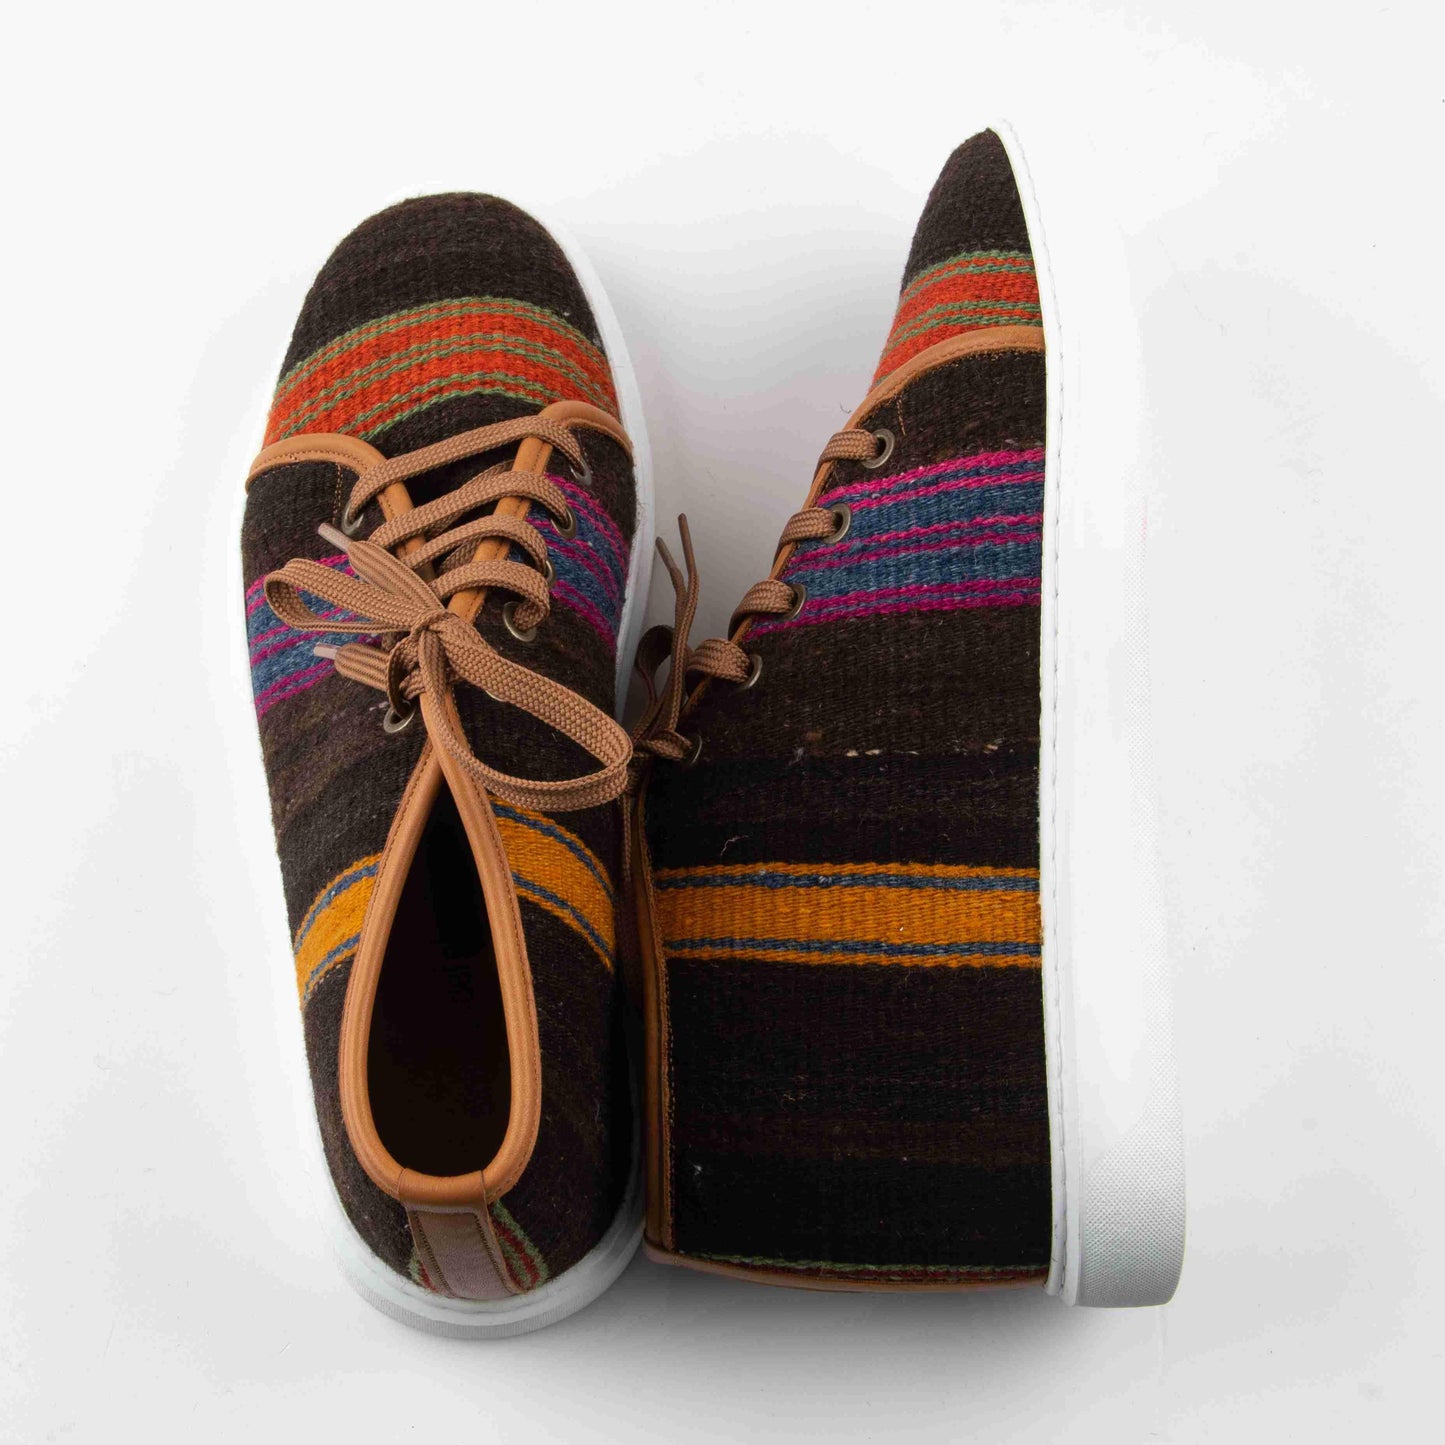 Ethnic Man Slip-On Shoes Crafted From Handmade Kilim and Real Leather Size 11 Base Width: 10 cm - Base Length: 30,5 cm